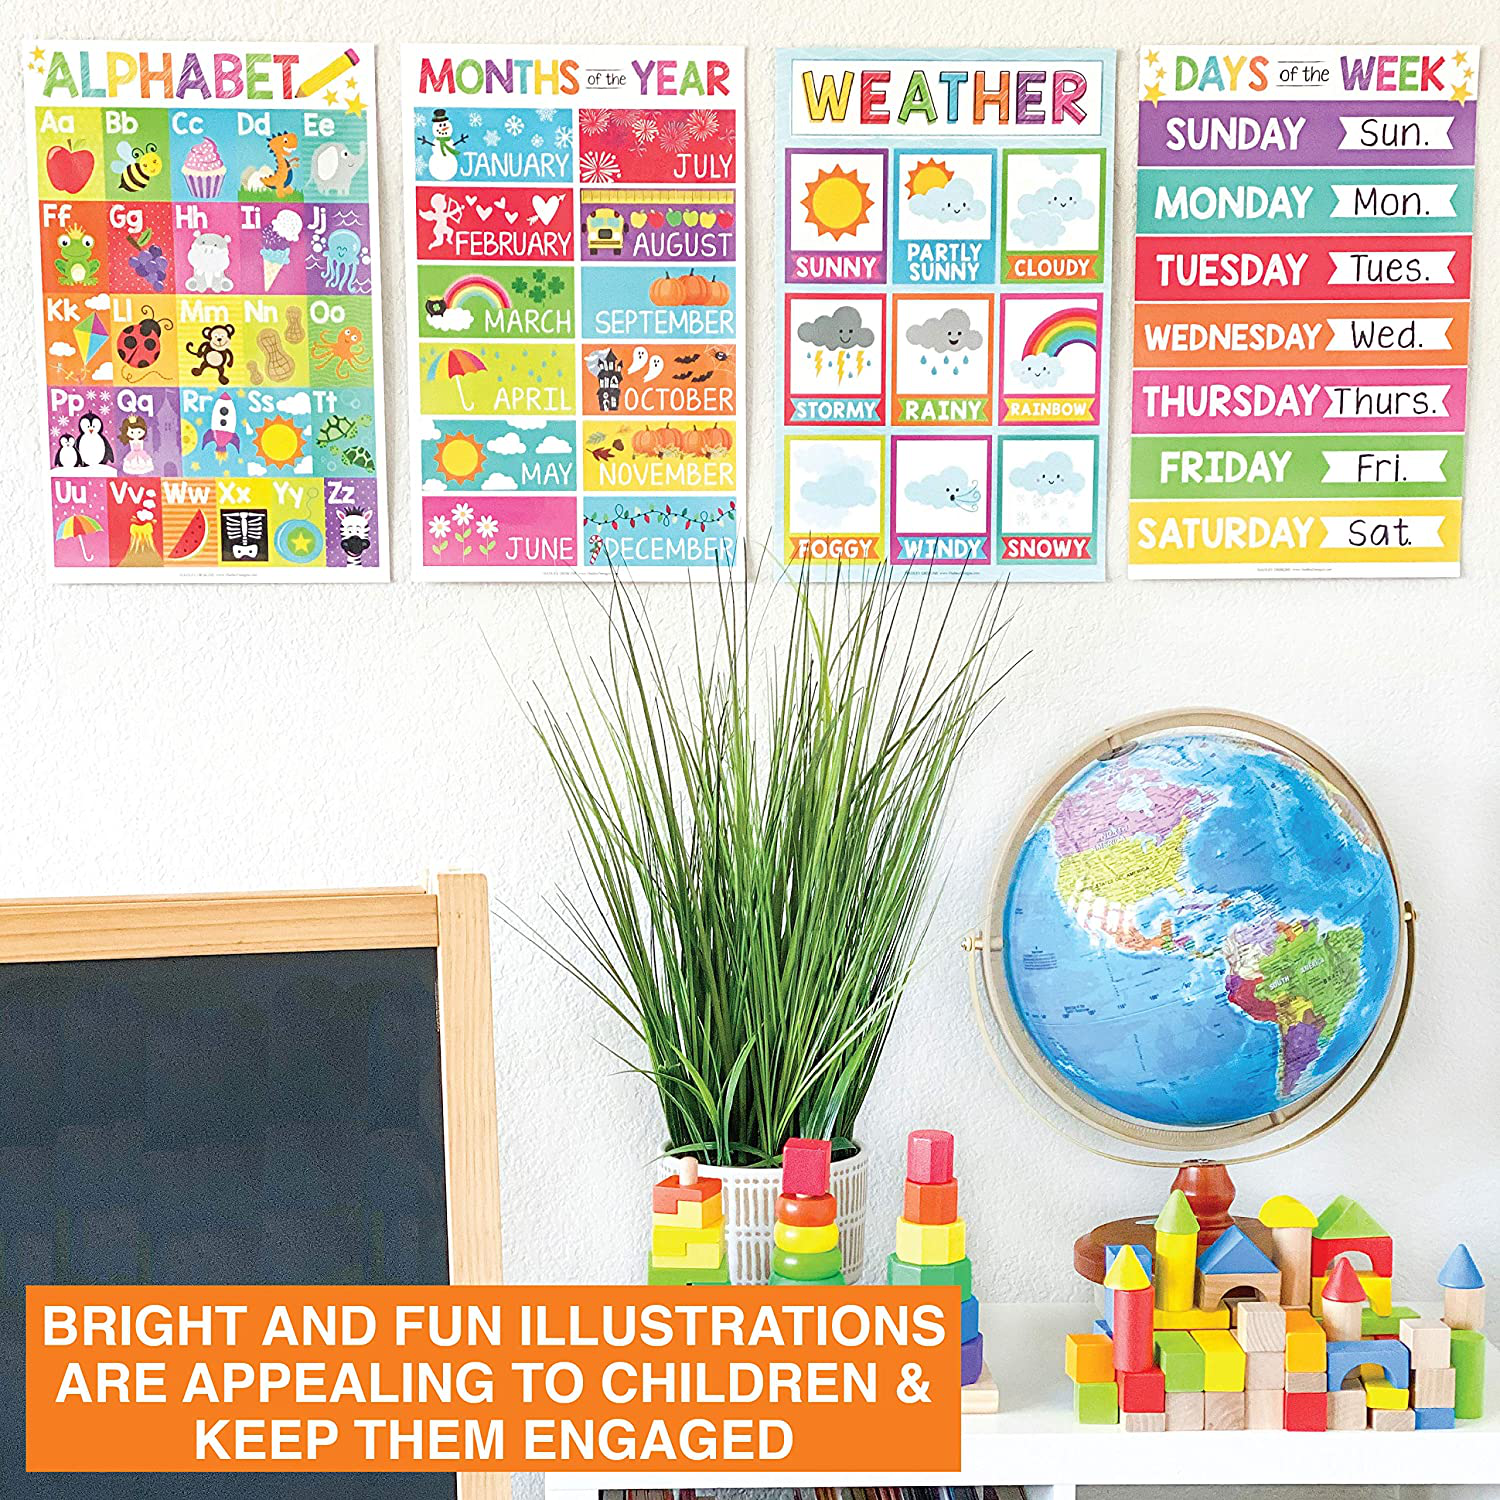 4 Alphabet, Months of the Year, Weather, Days of The Week Calendar For Kids, ABC Posters For Toddlers Wall Decor Art, Charts for Kindergarten Classroom PreK or Homeschool, Educational Laminated 11x17"